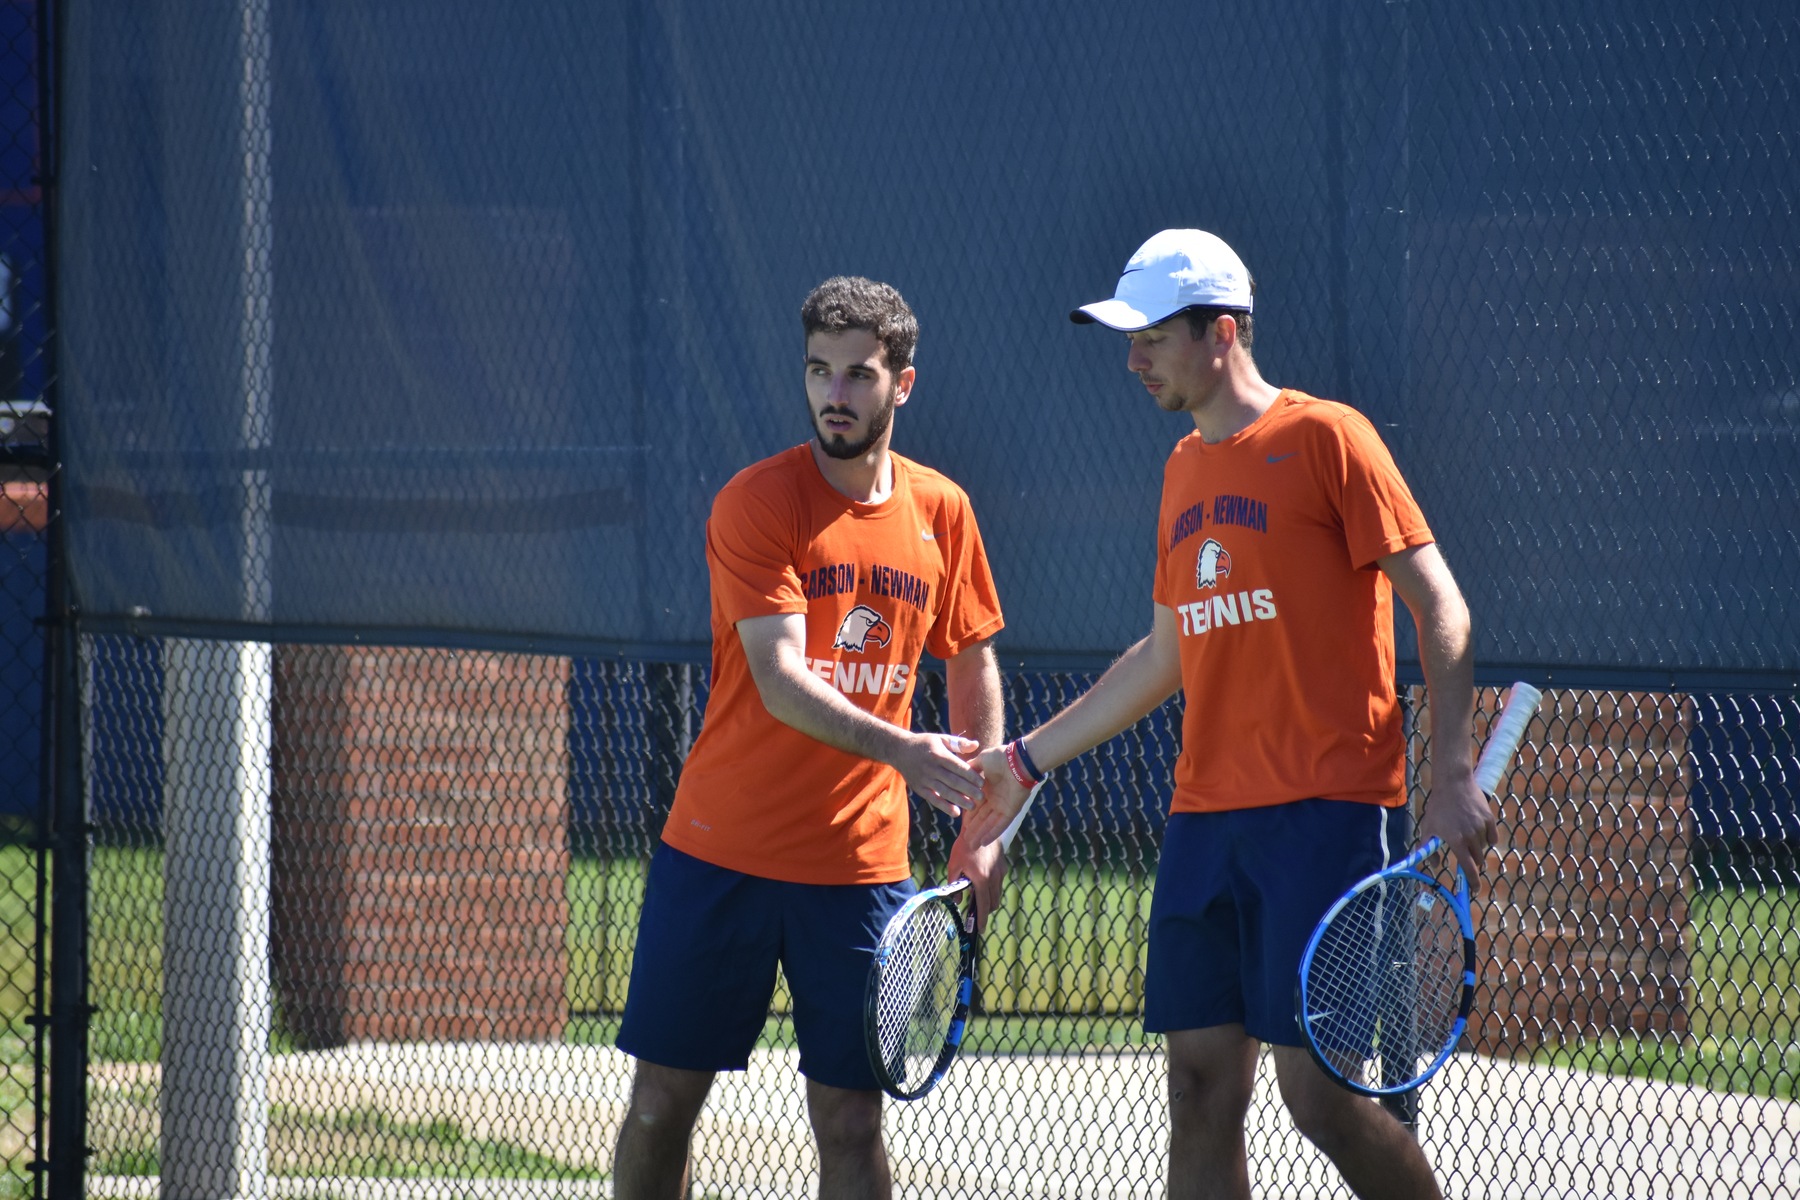 Men's tennis is back on the road against Coker on Saturday